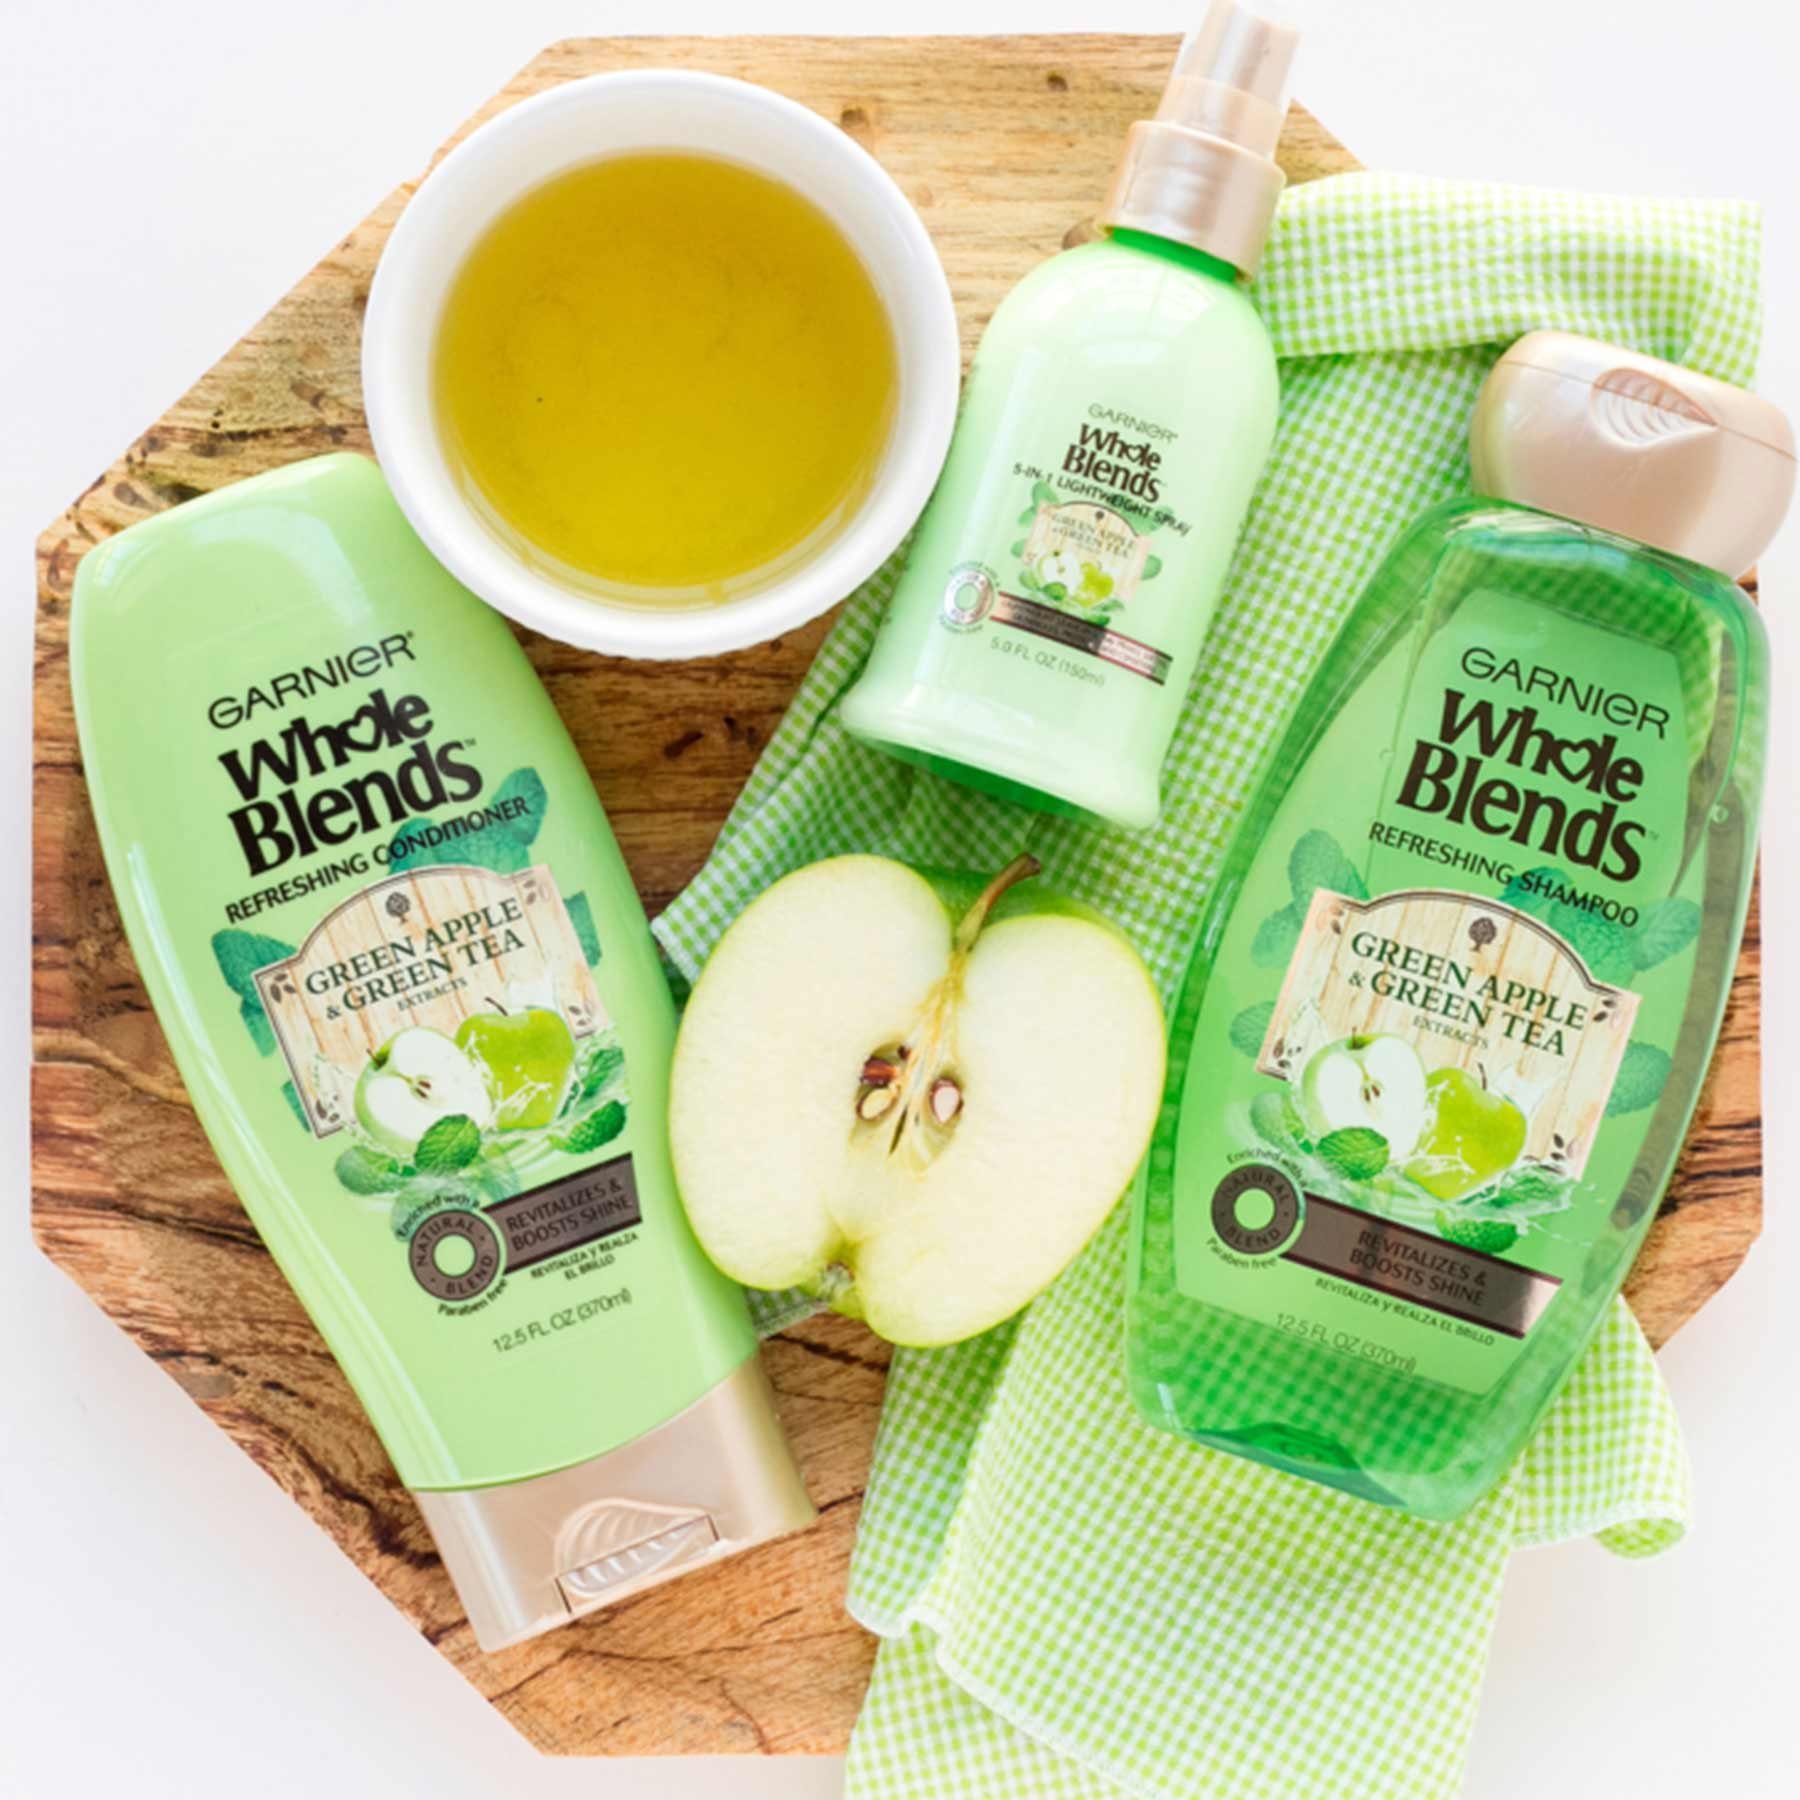 Whole Blends Green Apple and Green Tea Shampoo, Green Apple and Green Tea Conditioner, and Green Apple and Green Tea 5-in-1 Lightweight Spray on an octagonal wooden board with a white cup of green tea, half of a granny smith apple, and a green and white checkered cloth napkin on a white background.